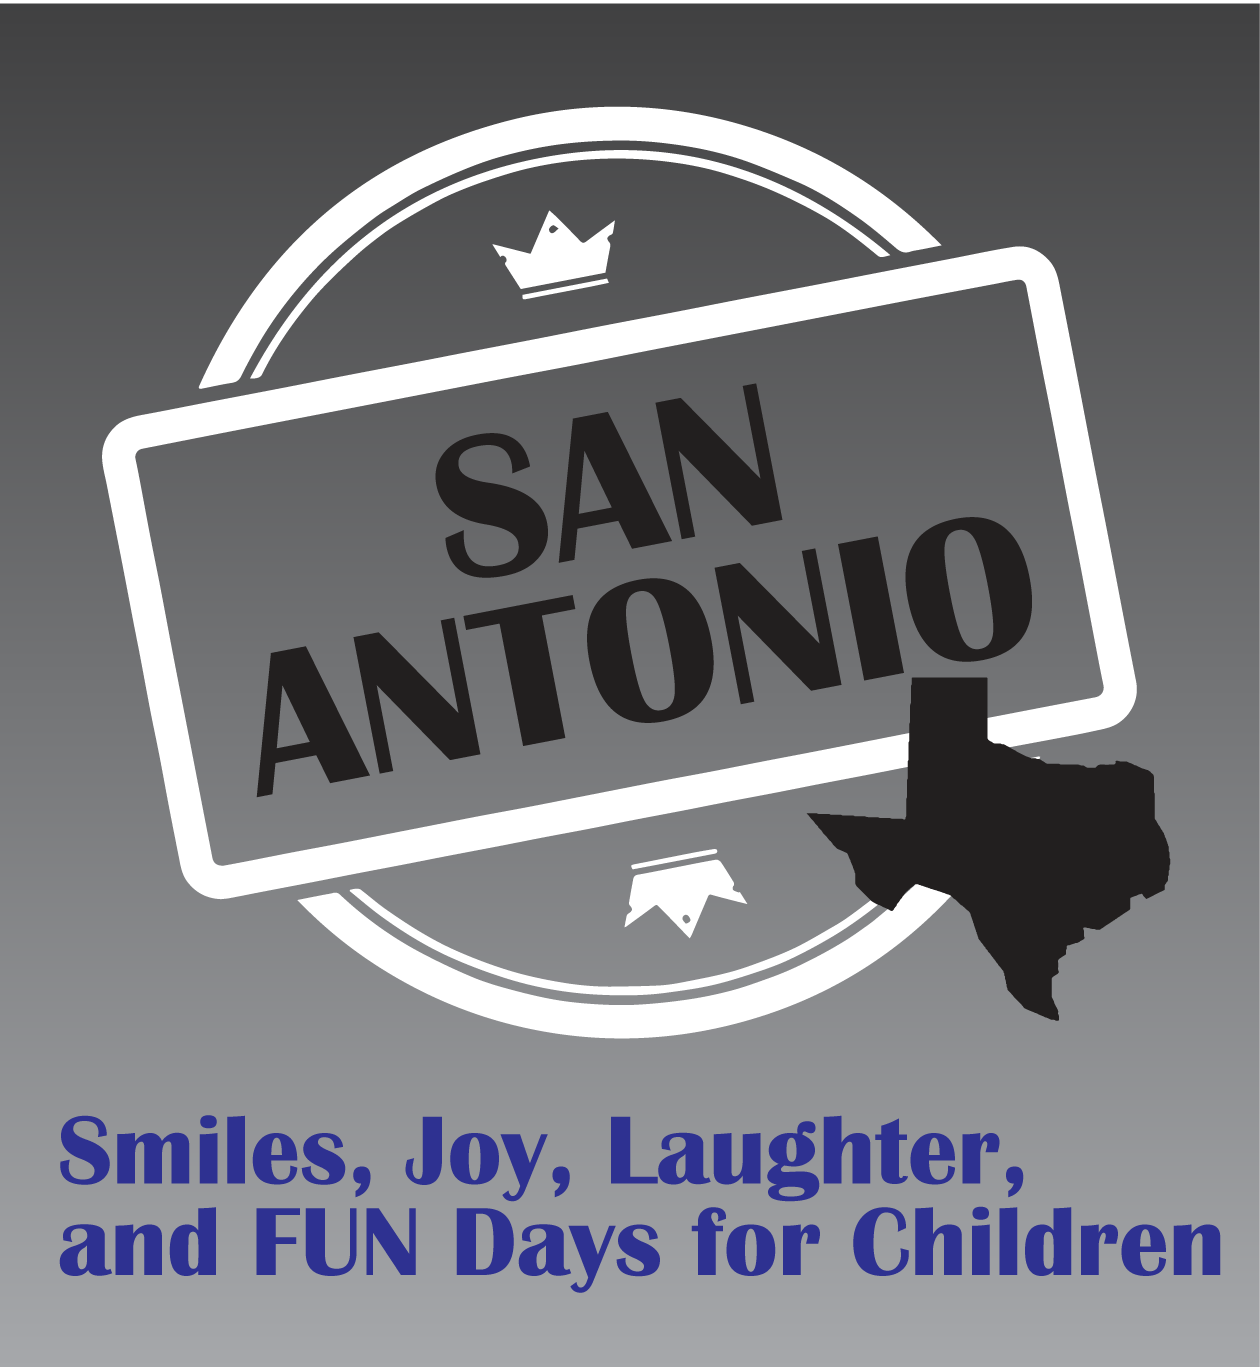 Image for Smiles, Joy, Laughter, and Fun Days for Children - San Antonio